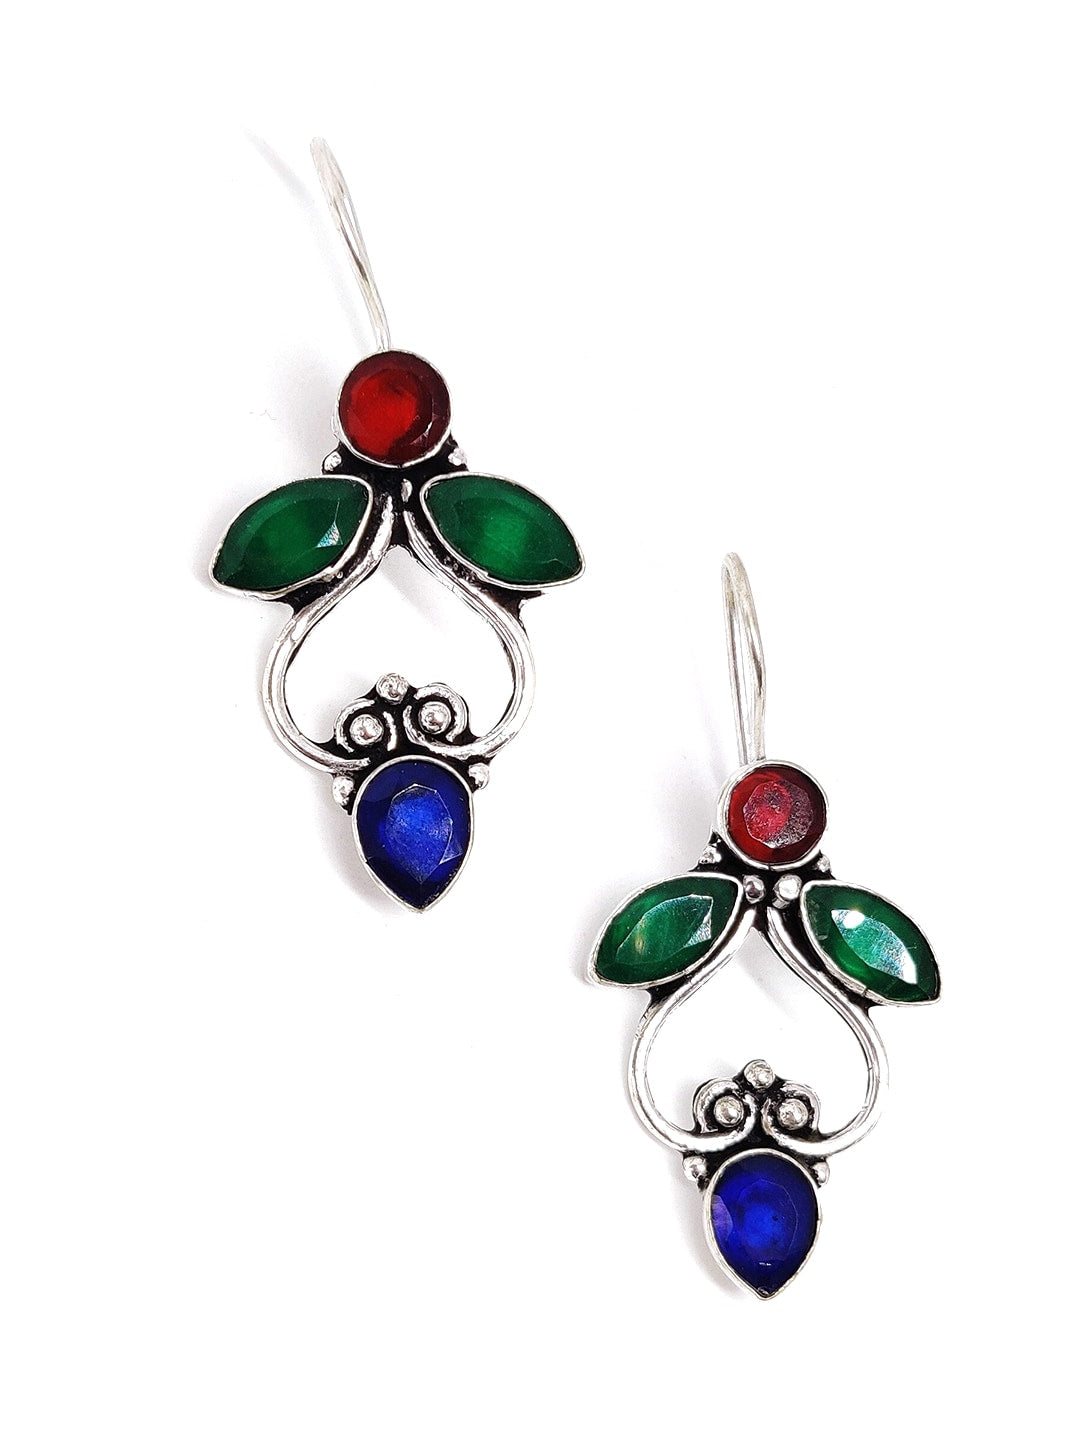 EL REGALO Green Contemporary Drop Earrings - for Women and Girls
Style ID: 16770278